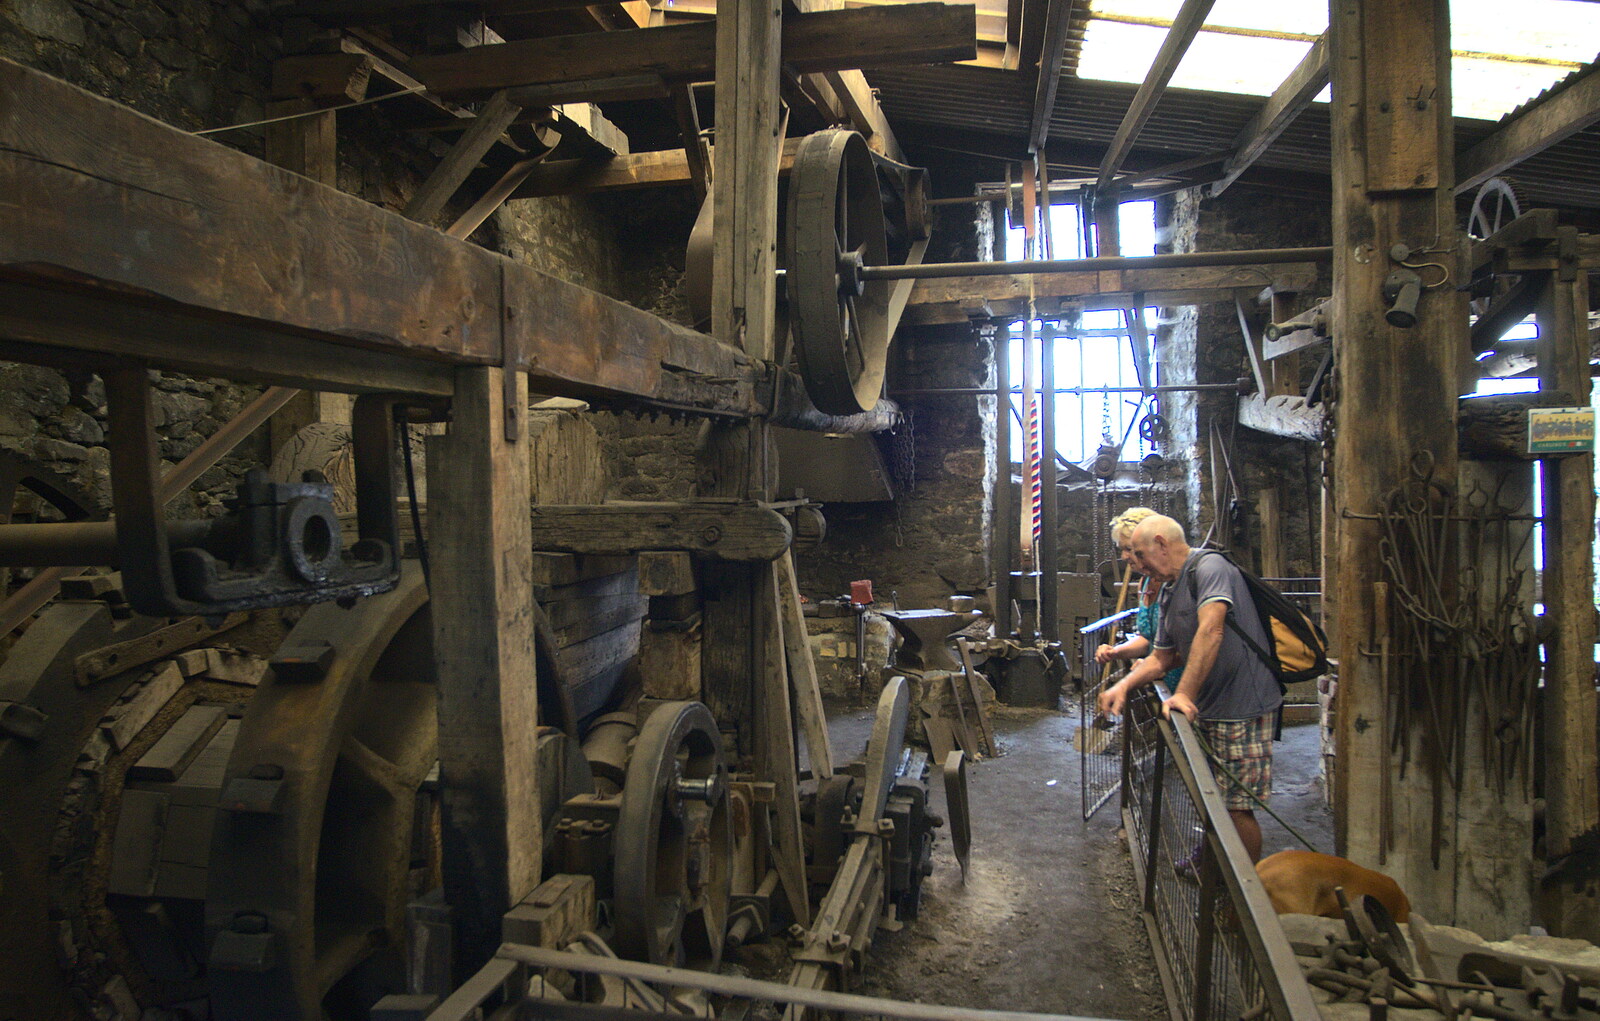 Inside Finch Foundry from Finch's Foundry and Lydford Gorge, Dartmoor, Devon - 12th August 2016